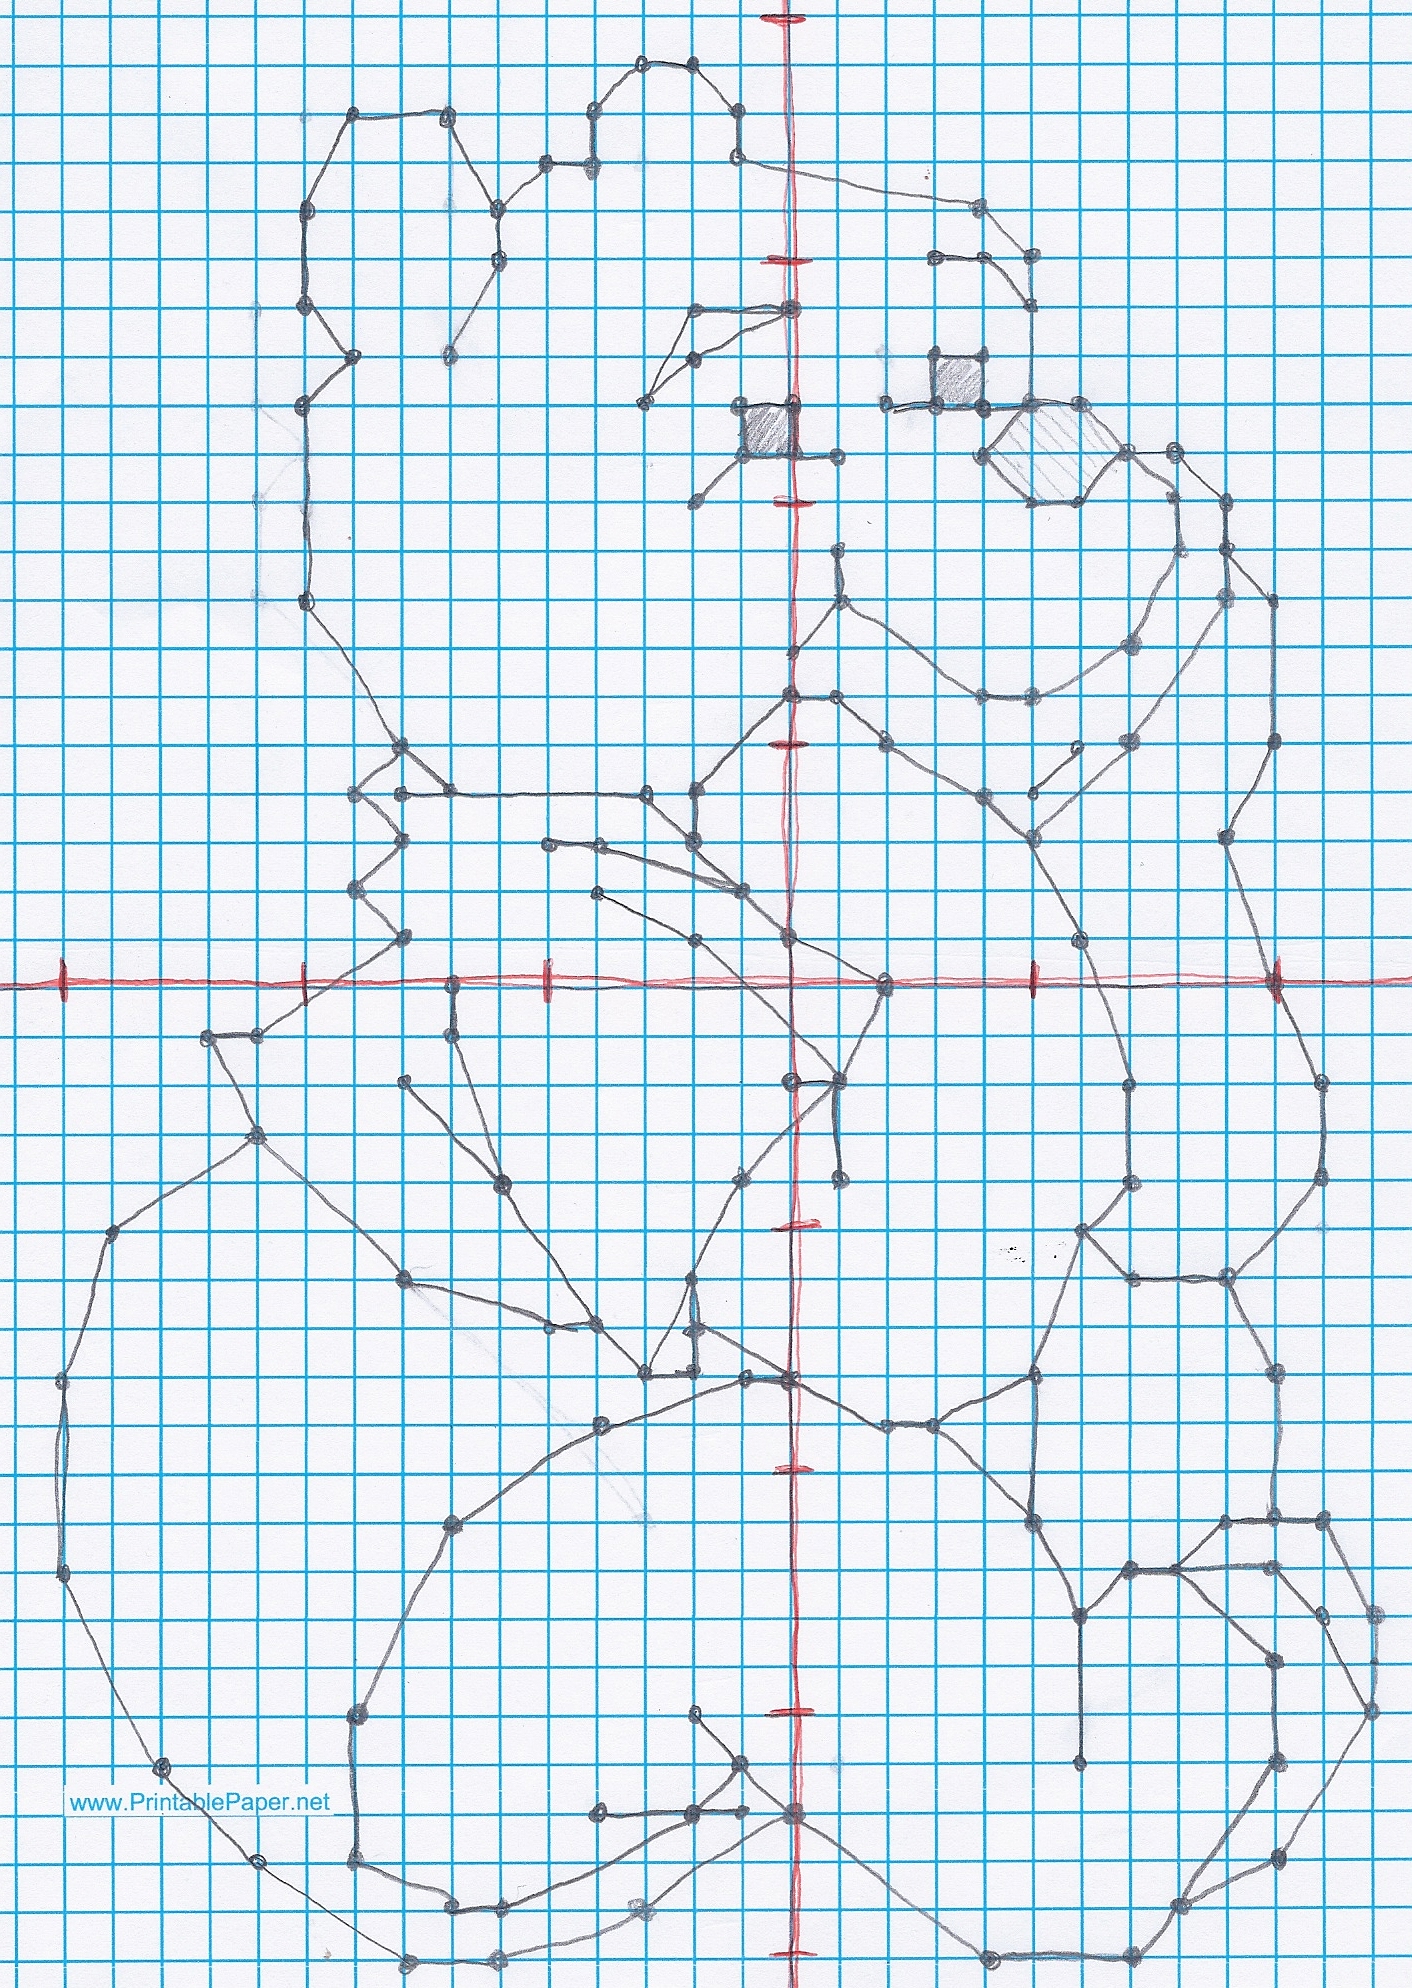 Free Printable Coordinate Grid Pictures